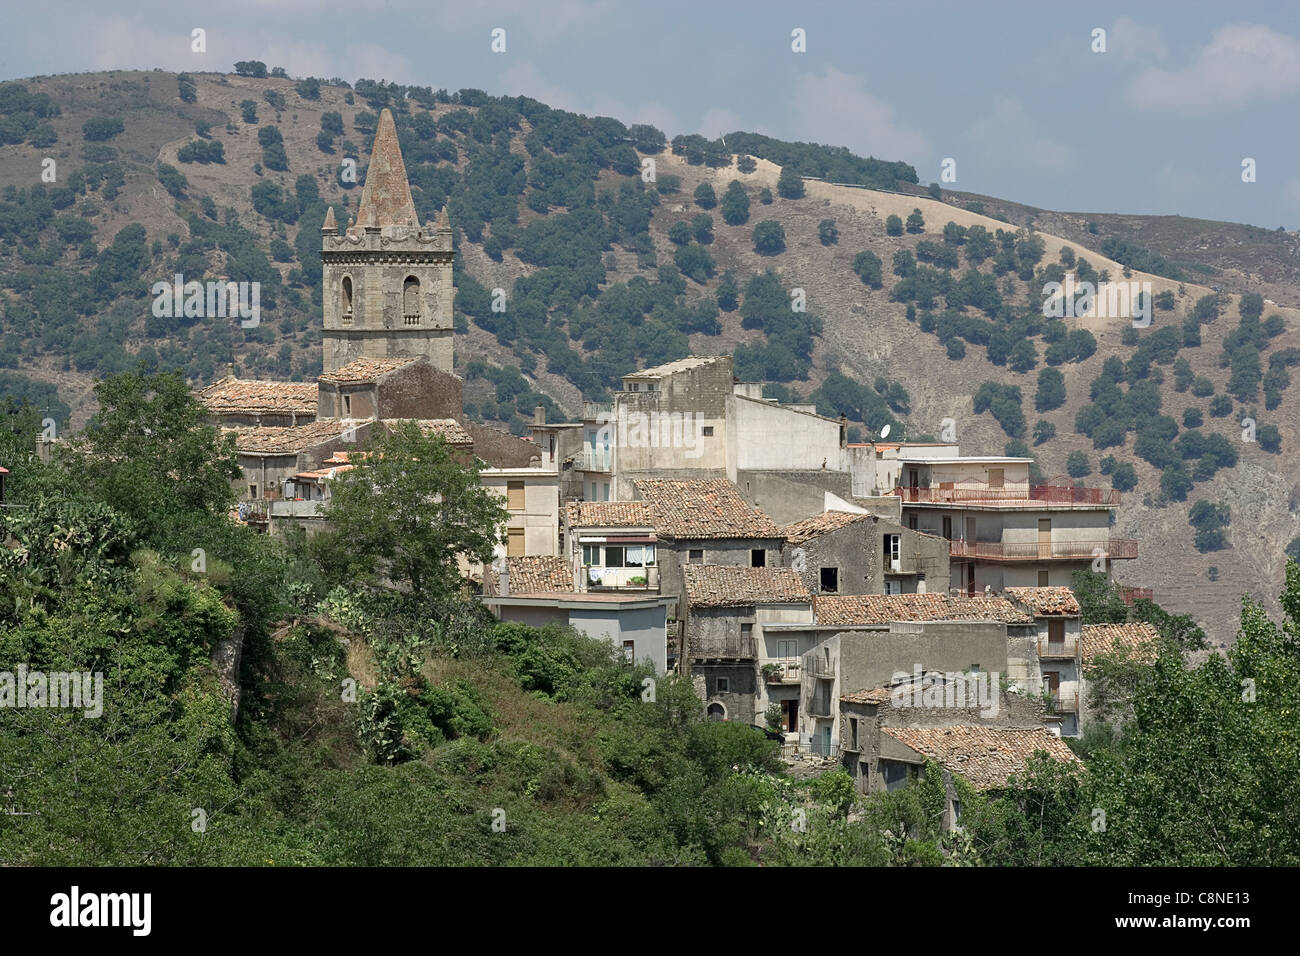 Italy, Sicily, Novara di Sicilia, view of the town nestling amongst the mountains Stock Photo